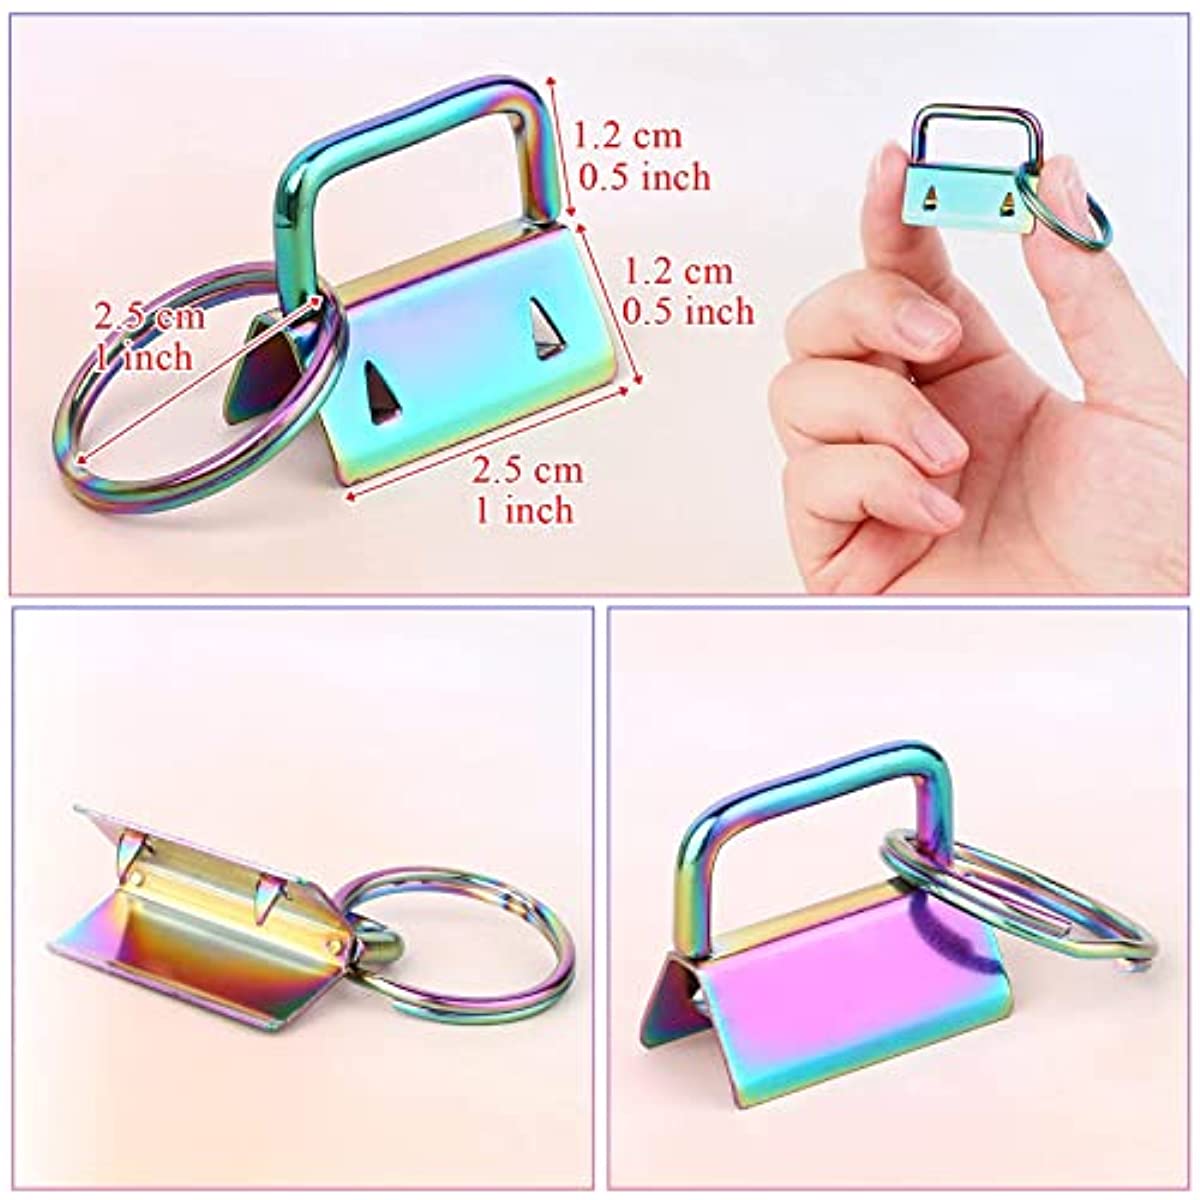 Key Fob Hardware 6 Colors Stainless Steel Keychain Key Fob